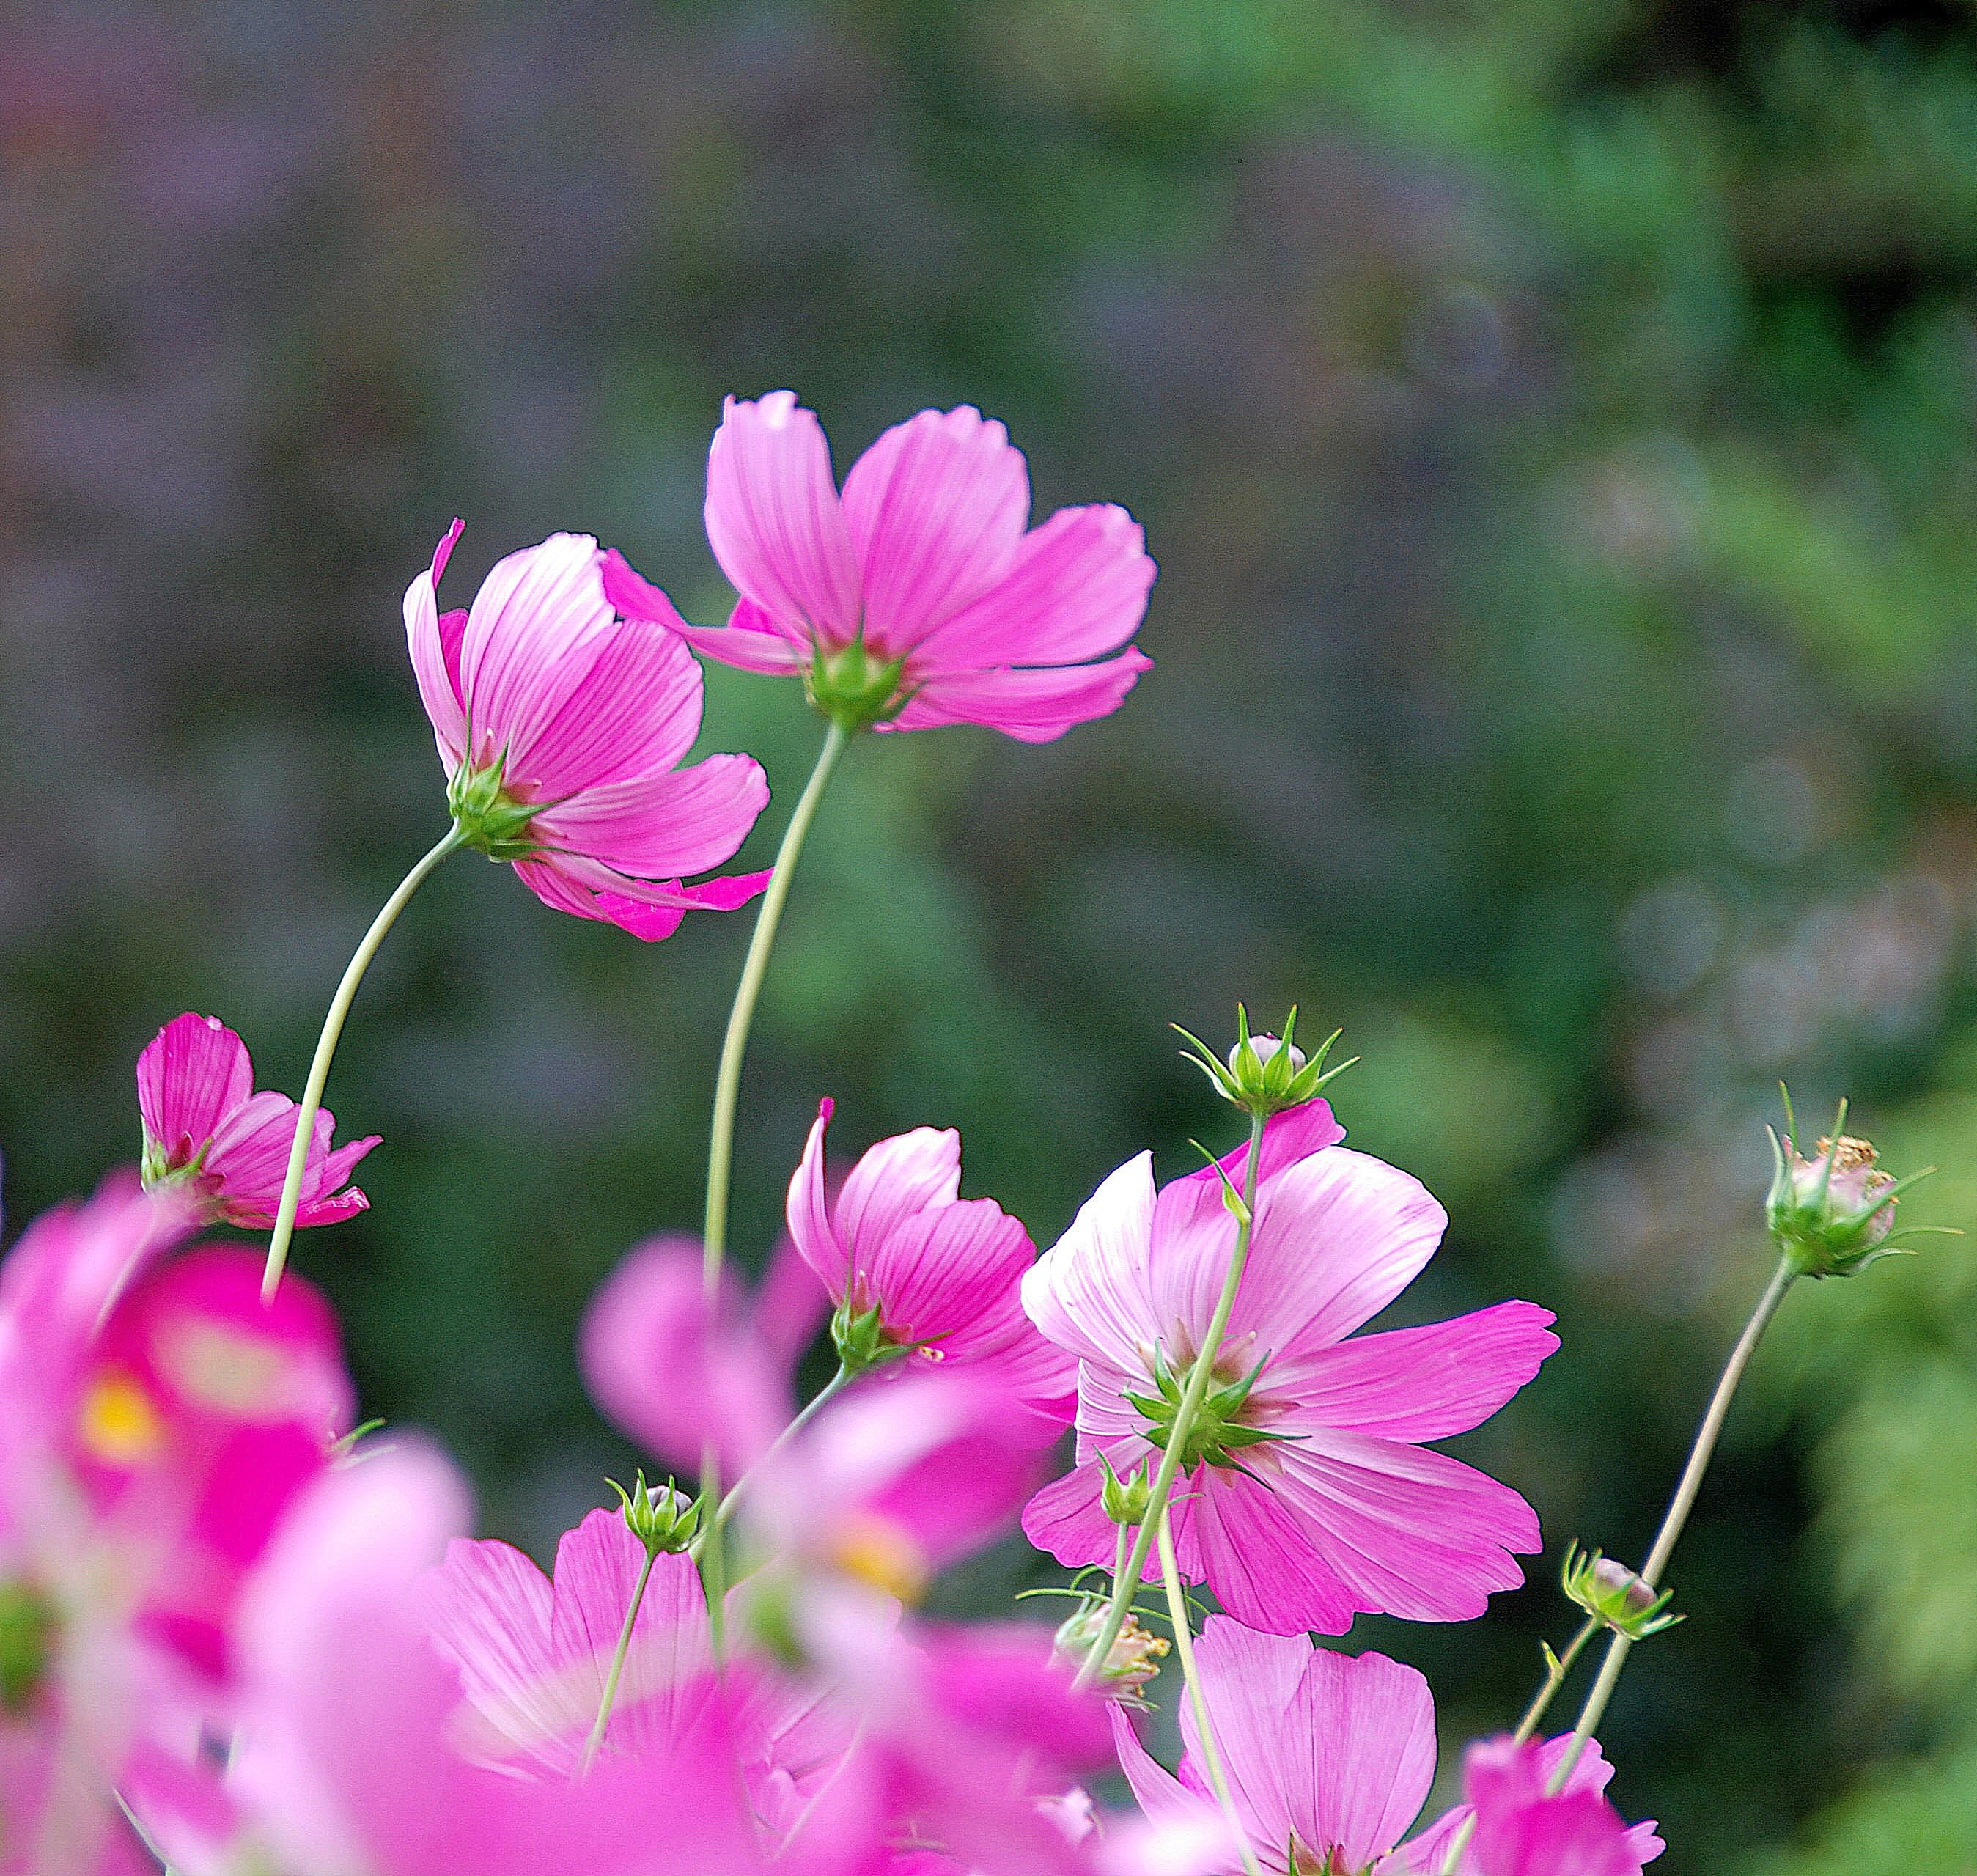 pink cosmos flowers during daytime, Blowing, Breeze, Searching